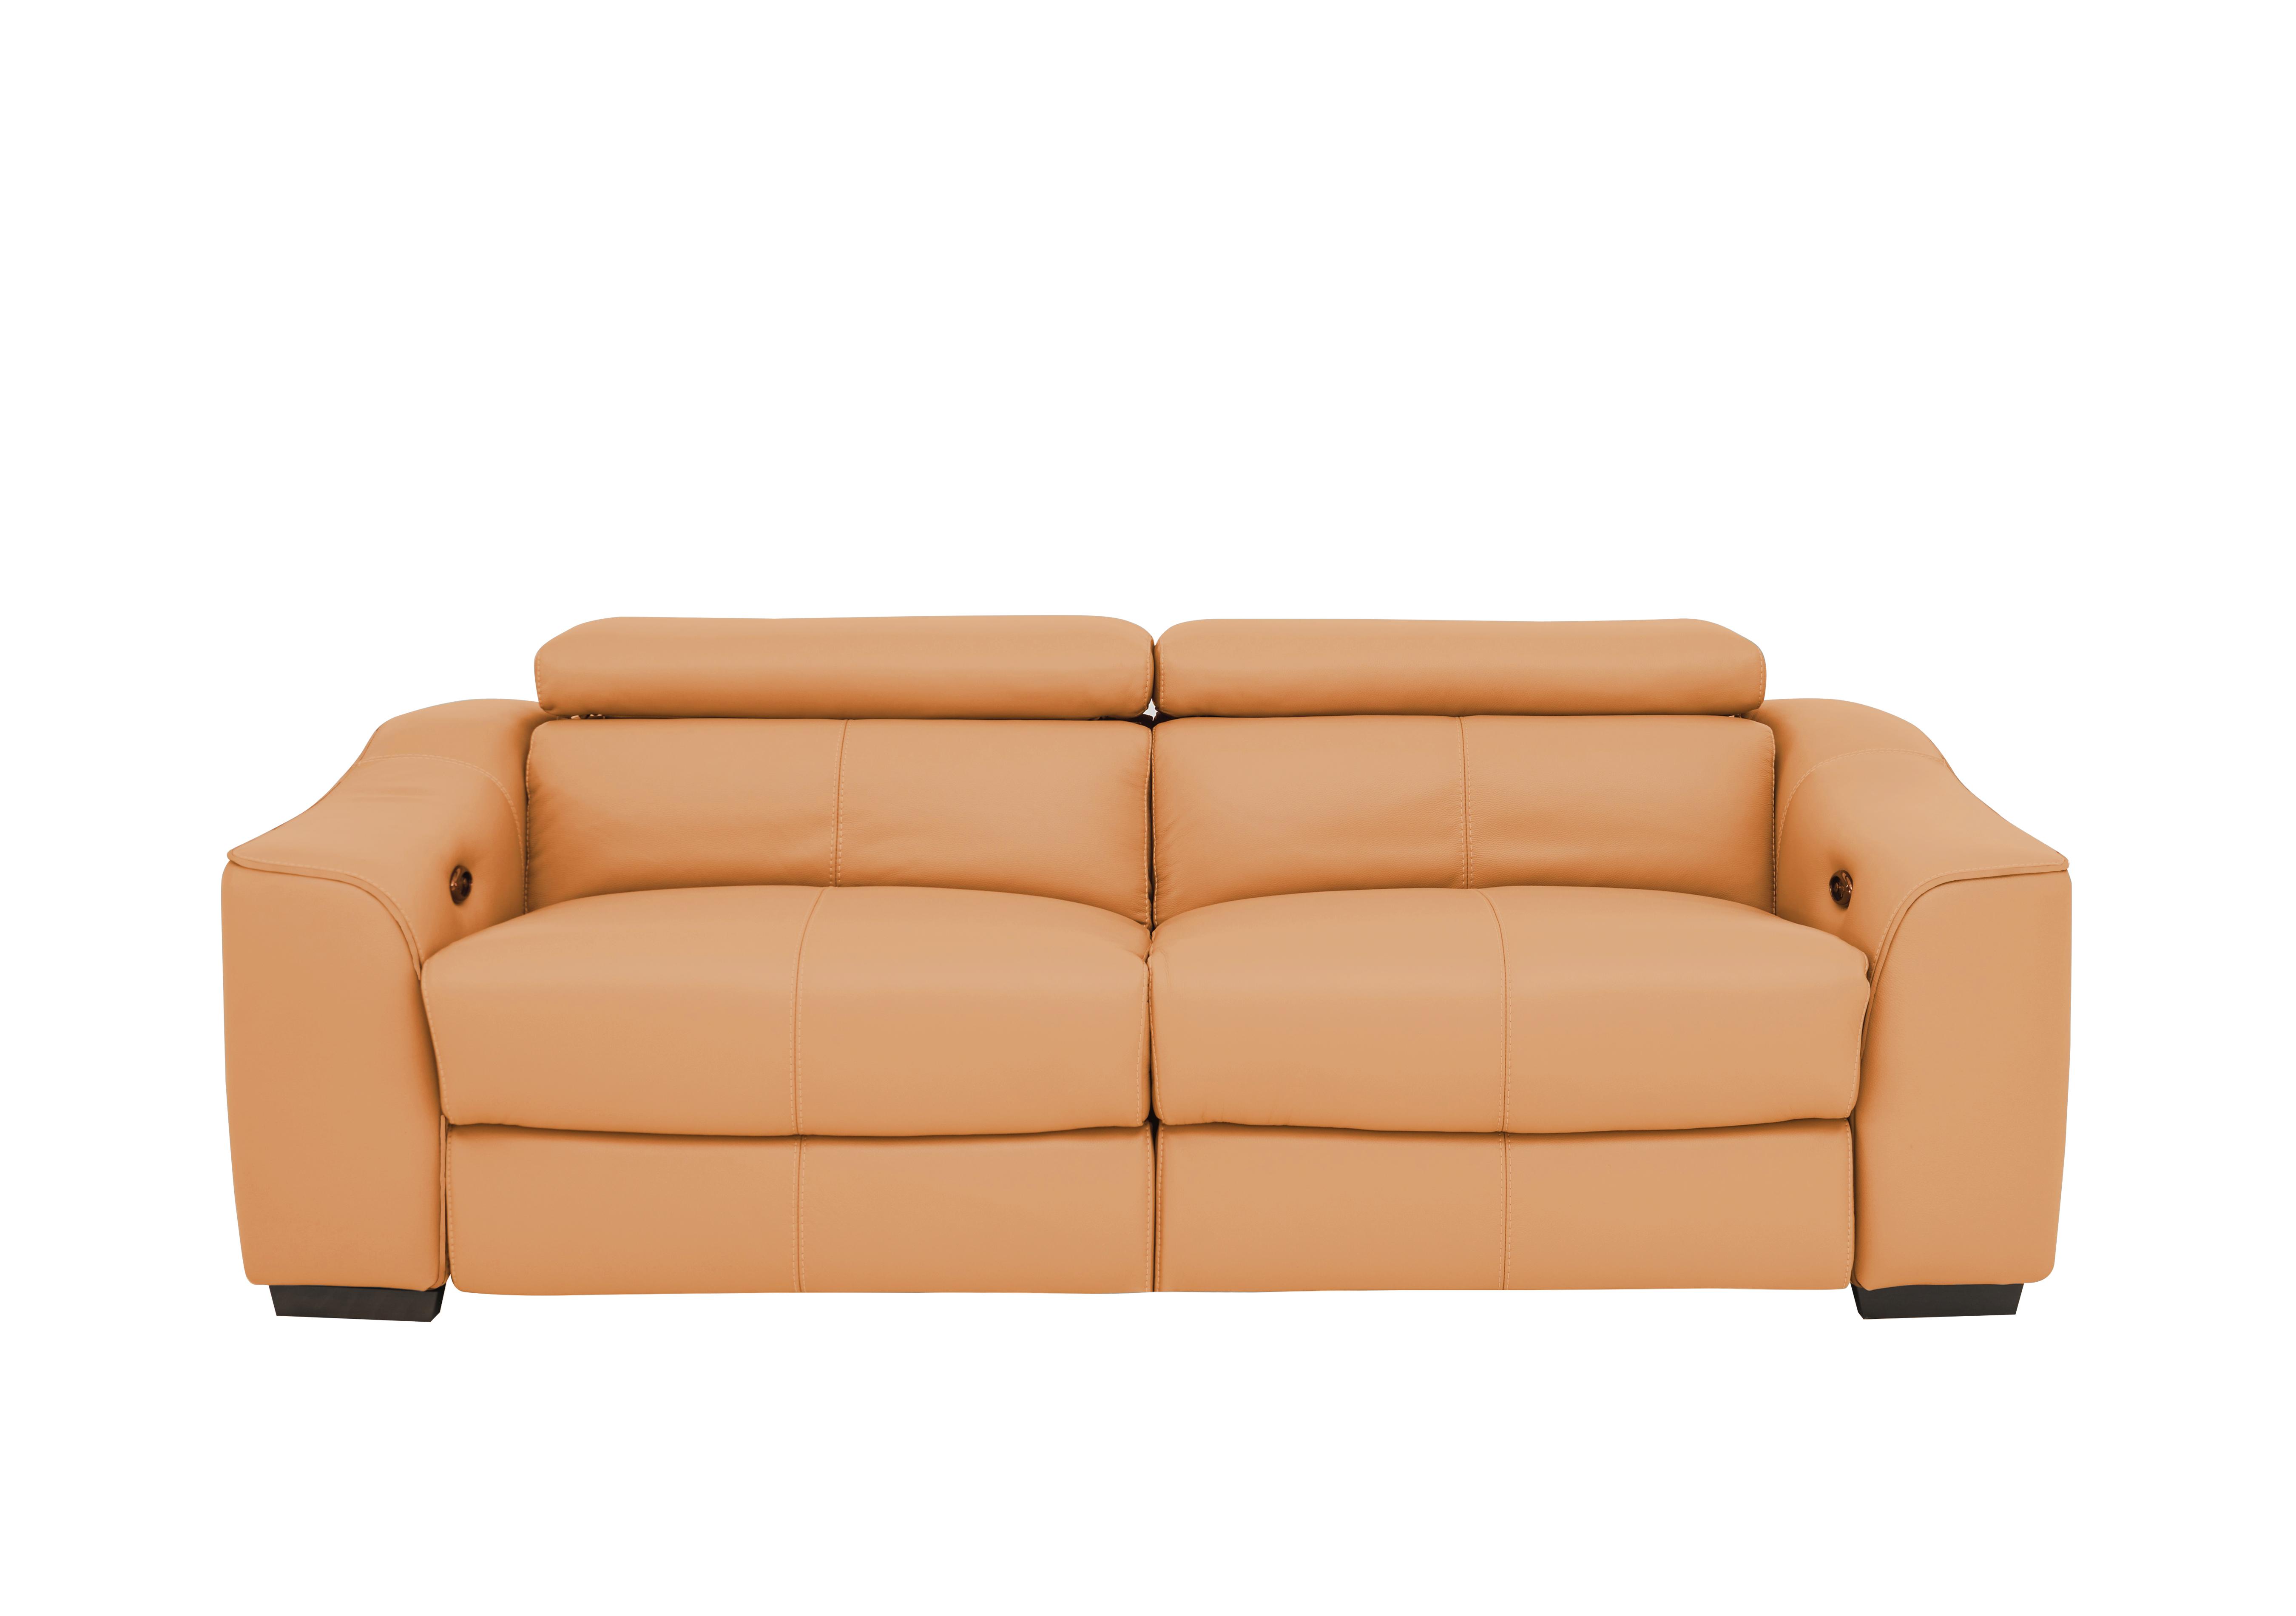 Elixir 3 Seater Leather Sofa Bed in Bv-335e Honey Yellow on Furniture Village